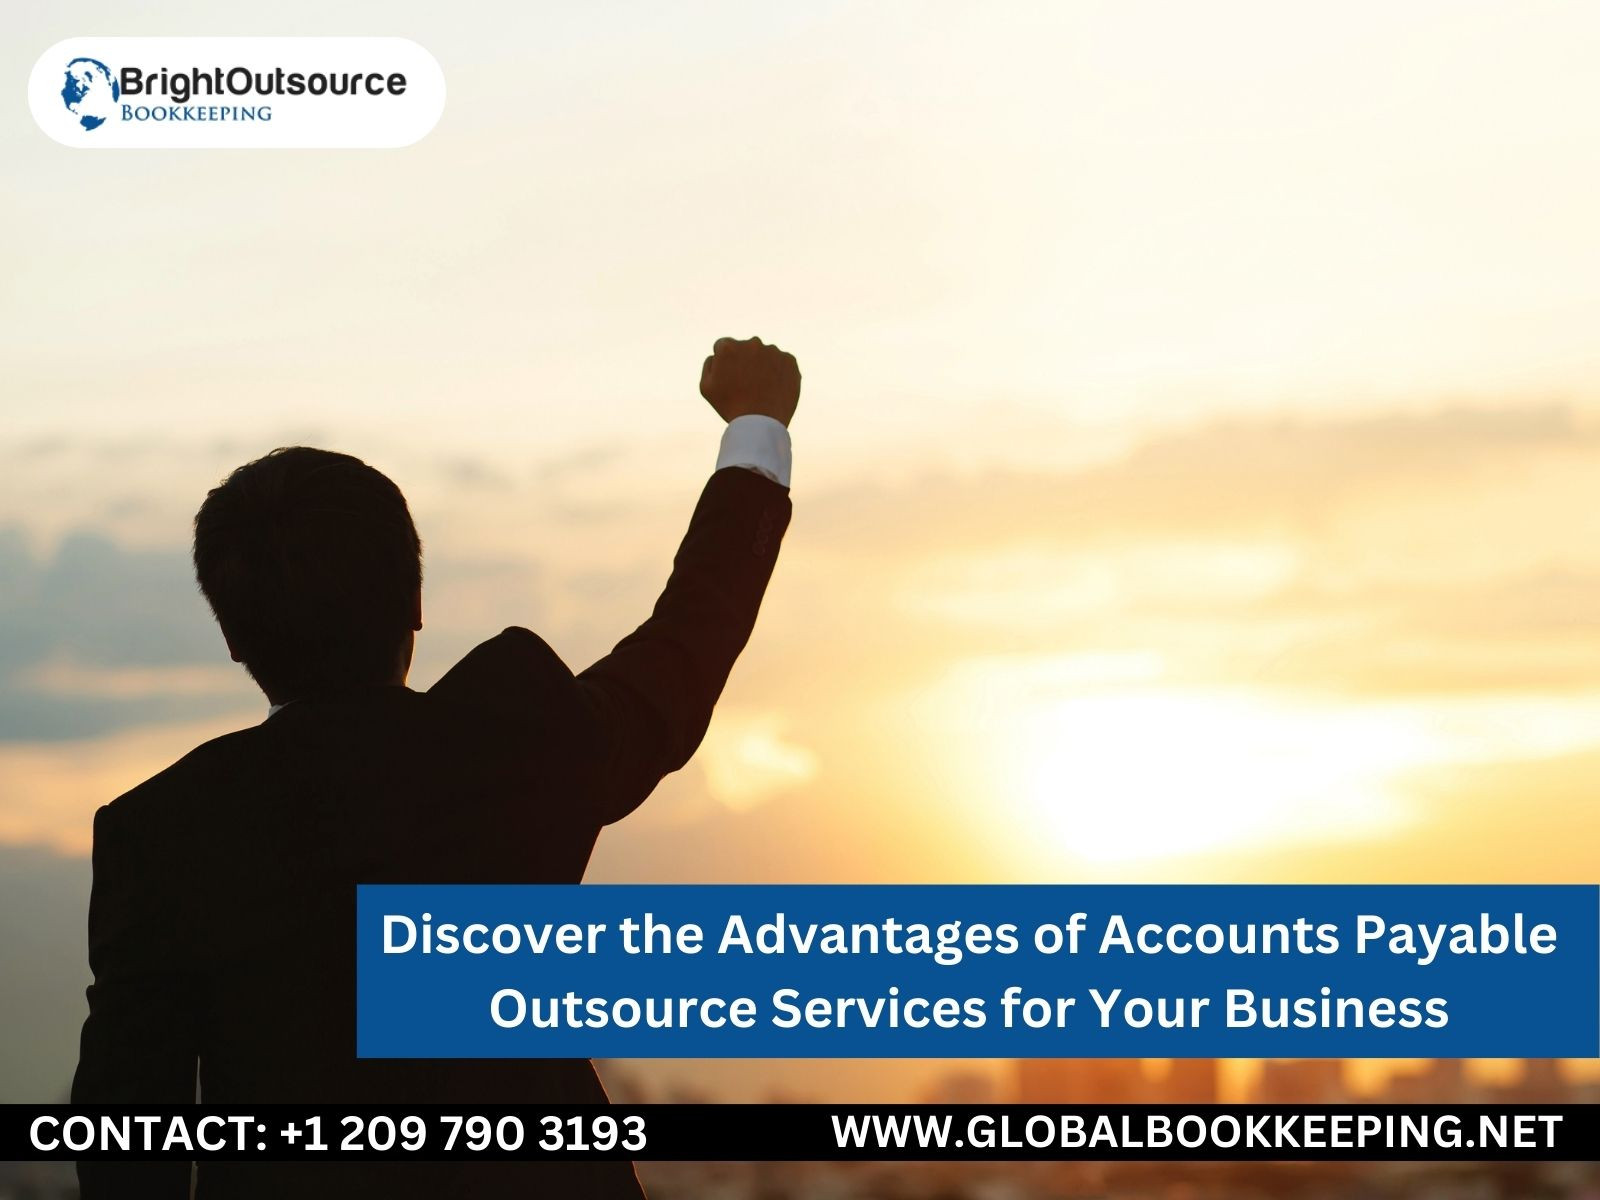 Discover the Advantages of Accounts Payable Outsource Services for Your Business